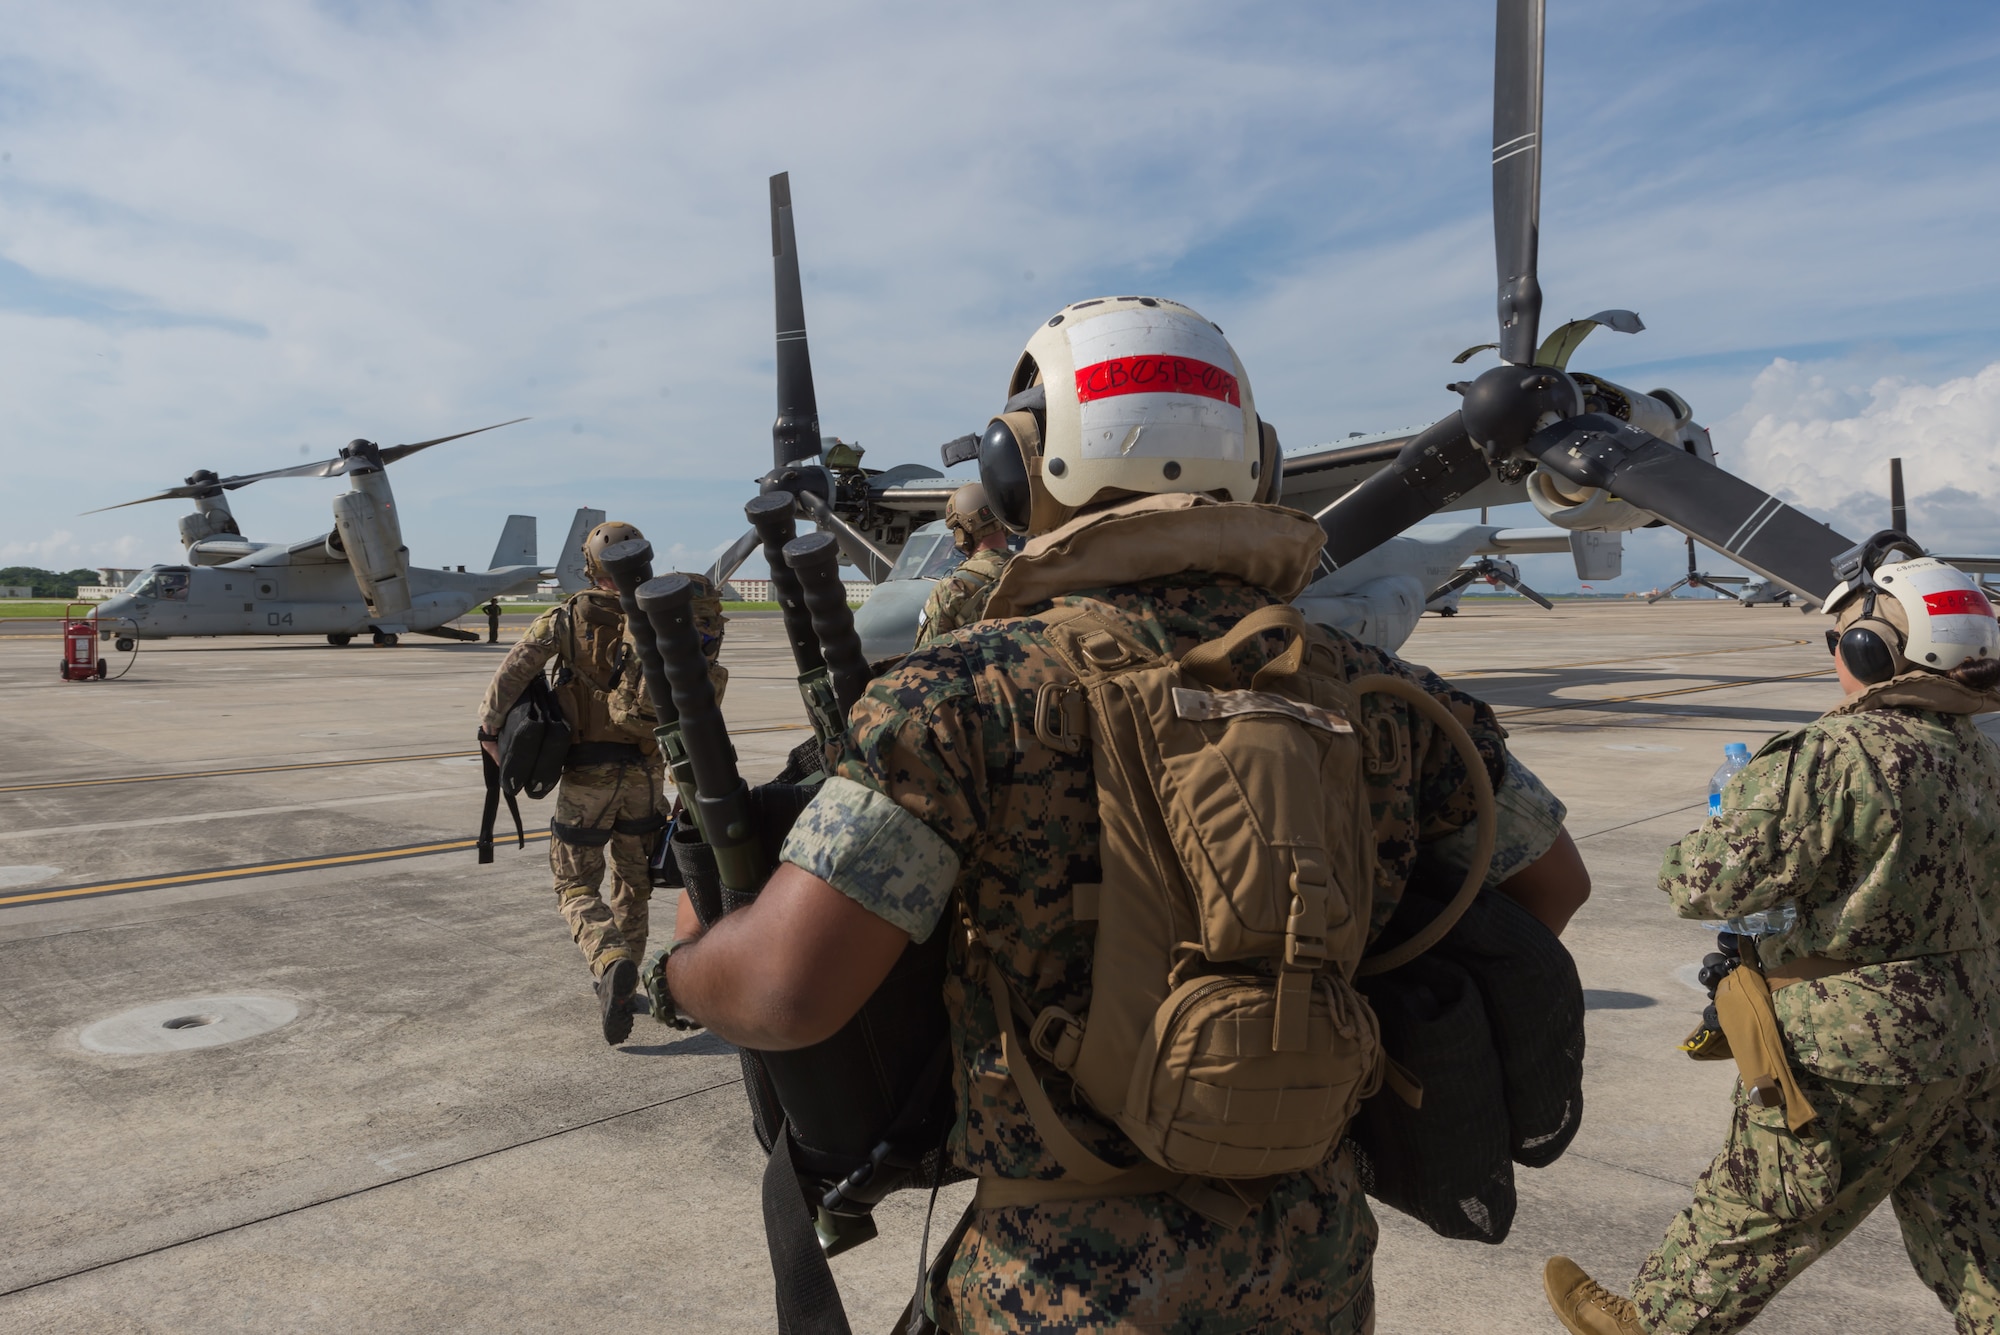 Members of the U.S. Air Force, Navy and Marines, board an MV-22 Osprey, June 6, 2018, at Marine Corps Air Station, Okinawa, Japan during an exercise. The Air Force performs joint medical exercises with other U.S. forces regularly in Okinawa to better prepare service members for real world emergencies. (U.S. Air Force photo illustration by Josh Mahler)